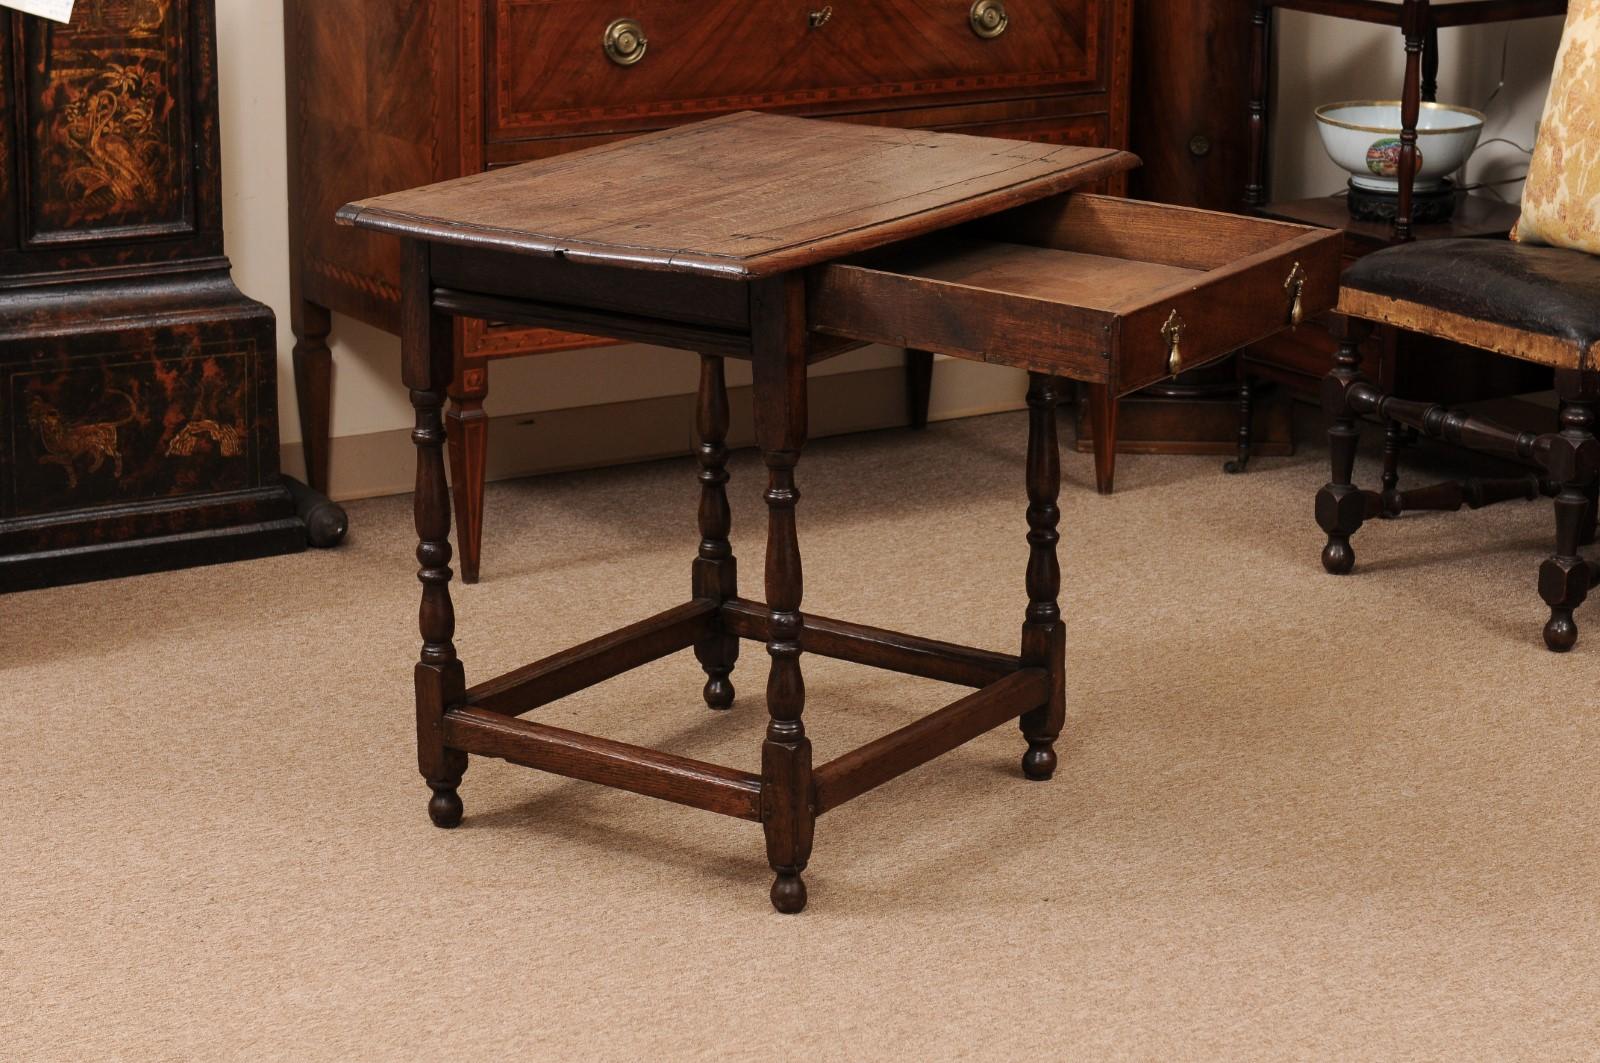 English 18th century Side Table with 1 Drawer, Turned Legs & Box Stretcher 1